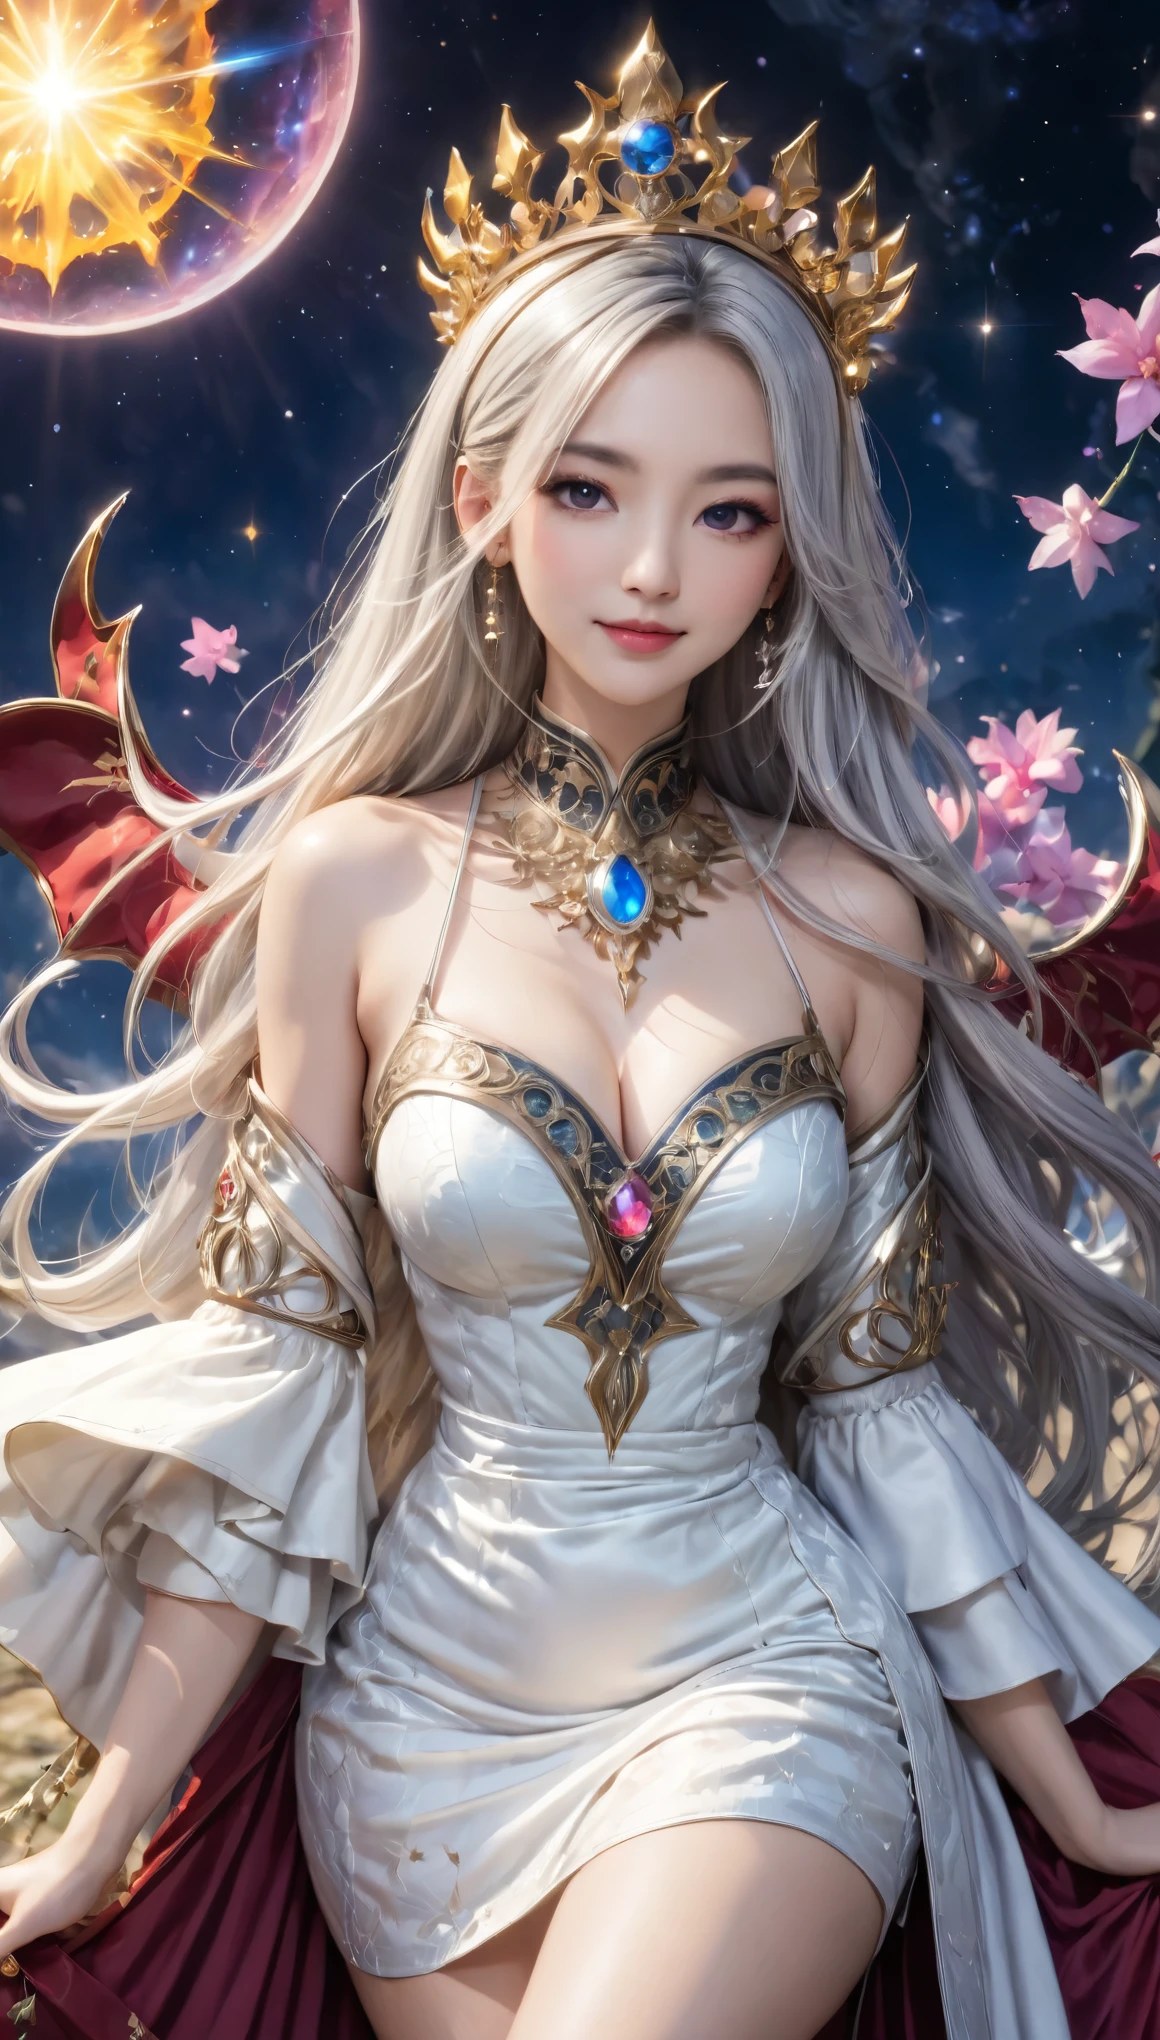 8K resolution, masterpiece, Highest quality, Award-winning works, unrealistic, From above, erotic, sole sexy lady, healthy shaped body, 22 years old, black mage, 165cm tall, huge firm bouncing busts,, white silver long wavy hair, Detailed facial depictions, BREAK, godmysterious blue eyes, Standard nose, Eyeliner, pink lips, sexy long legs, Clear skin, holy knight, Gothic ruffle long dress, A dress with a complex structure, Seven-colored colorful dress, Clothed in flames, royal coat of arms, elegant, Very detailed, Delicate depiction of hair, miniature painting, Digital Painting, artstation concept art, Smooth, Sharp focus, shape, Art Jam、Greg Rutkowski、Alphonse Mucha's、William Adolphe Bouguereau、art：Stephanie Law , Royal Jewel, nature, Symmetric, Greg Rutkowski, Charlie Bowwater, Unreal, surreal, Dynamic Lighting, Fantasy art, Complex colors, Colorful magic circle, flash, dynamic sexy poses, A kind smile, Mysterious Background, Aura, A gentle gaze, BREAK, Small faint lights and flying fireflies, night, lanthanum, From above, looking down on the world below, Starry Sky, milky way, nebula, shooting star, god々A sacred staff that emits a brilliant light, Back view, Looking back towards the camera